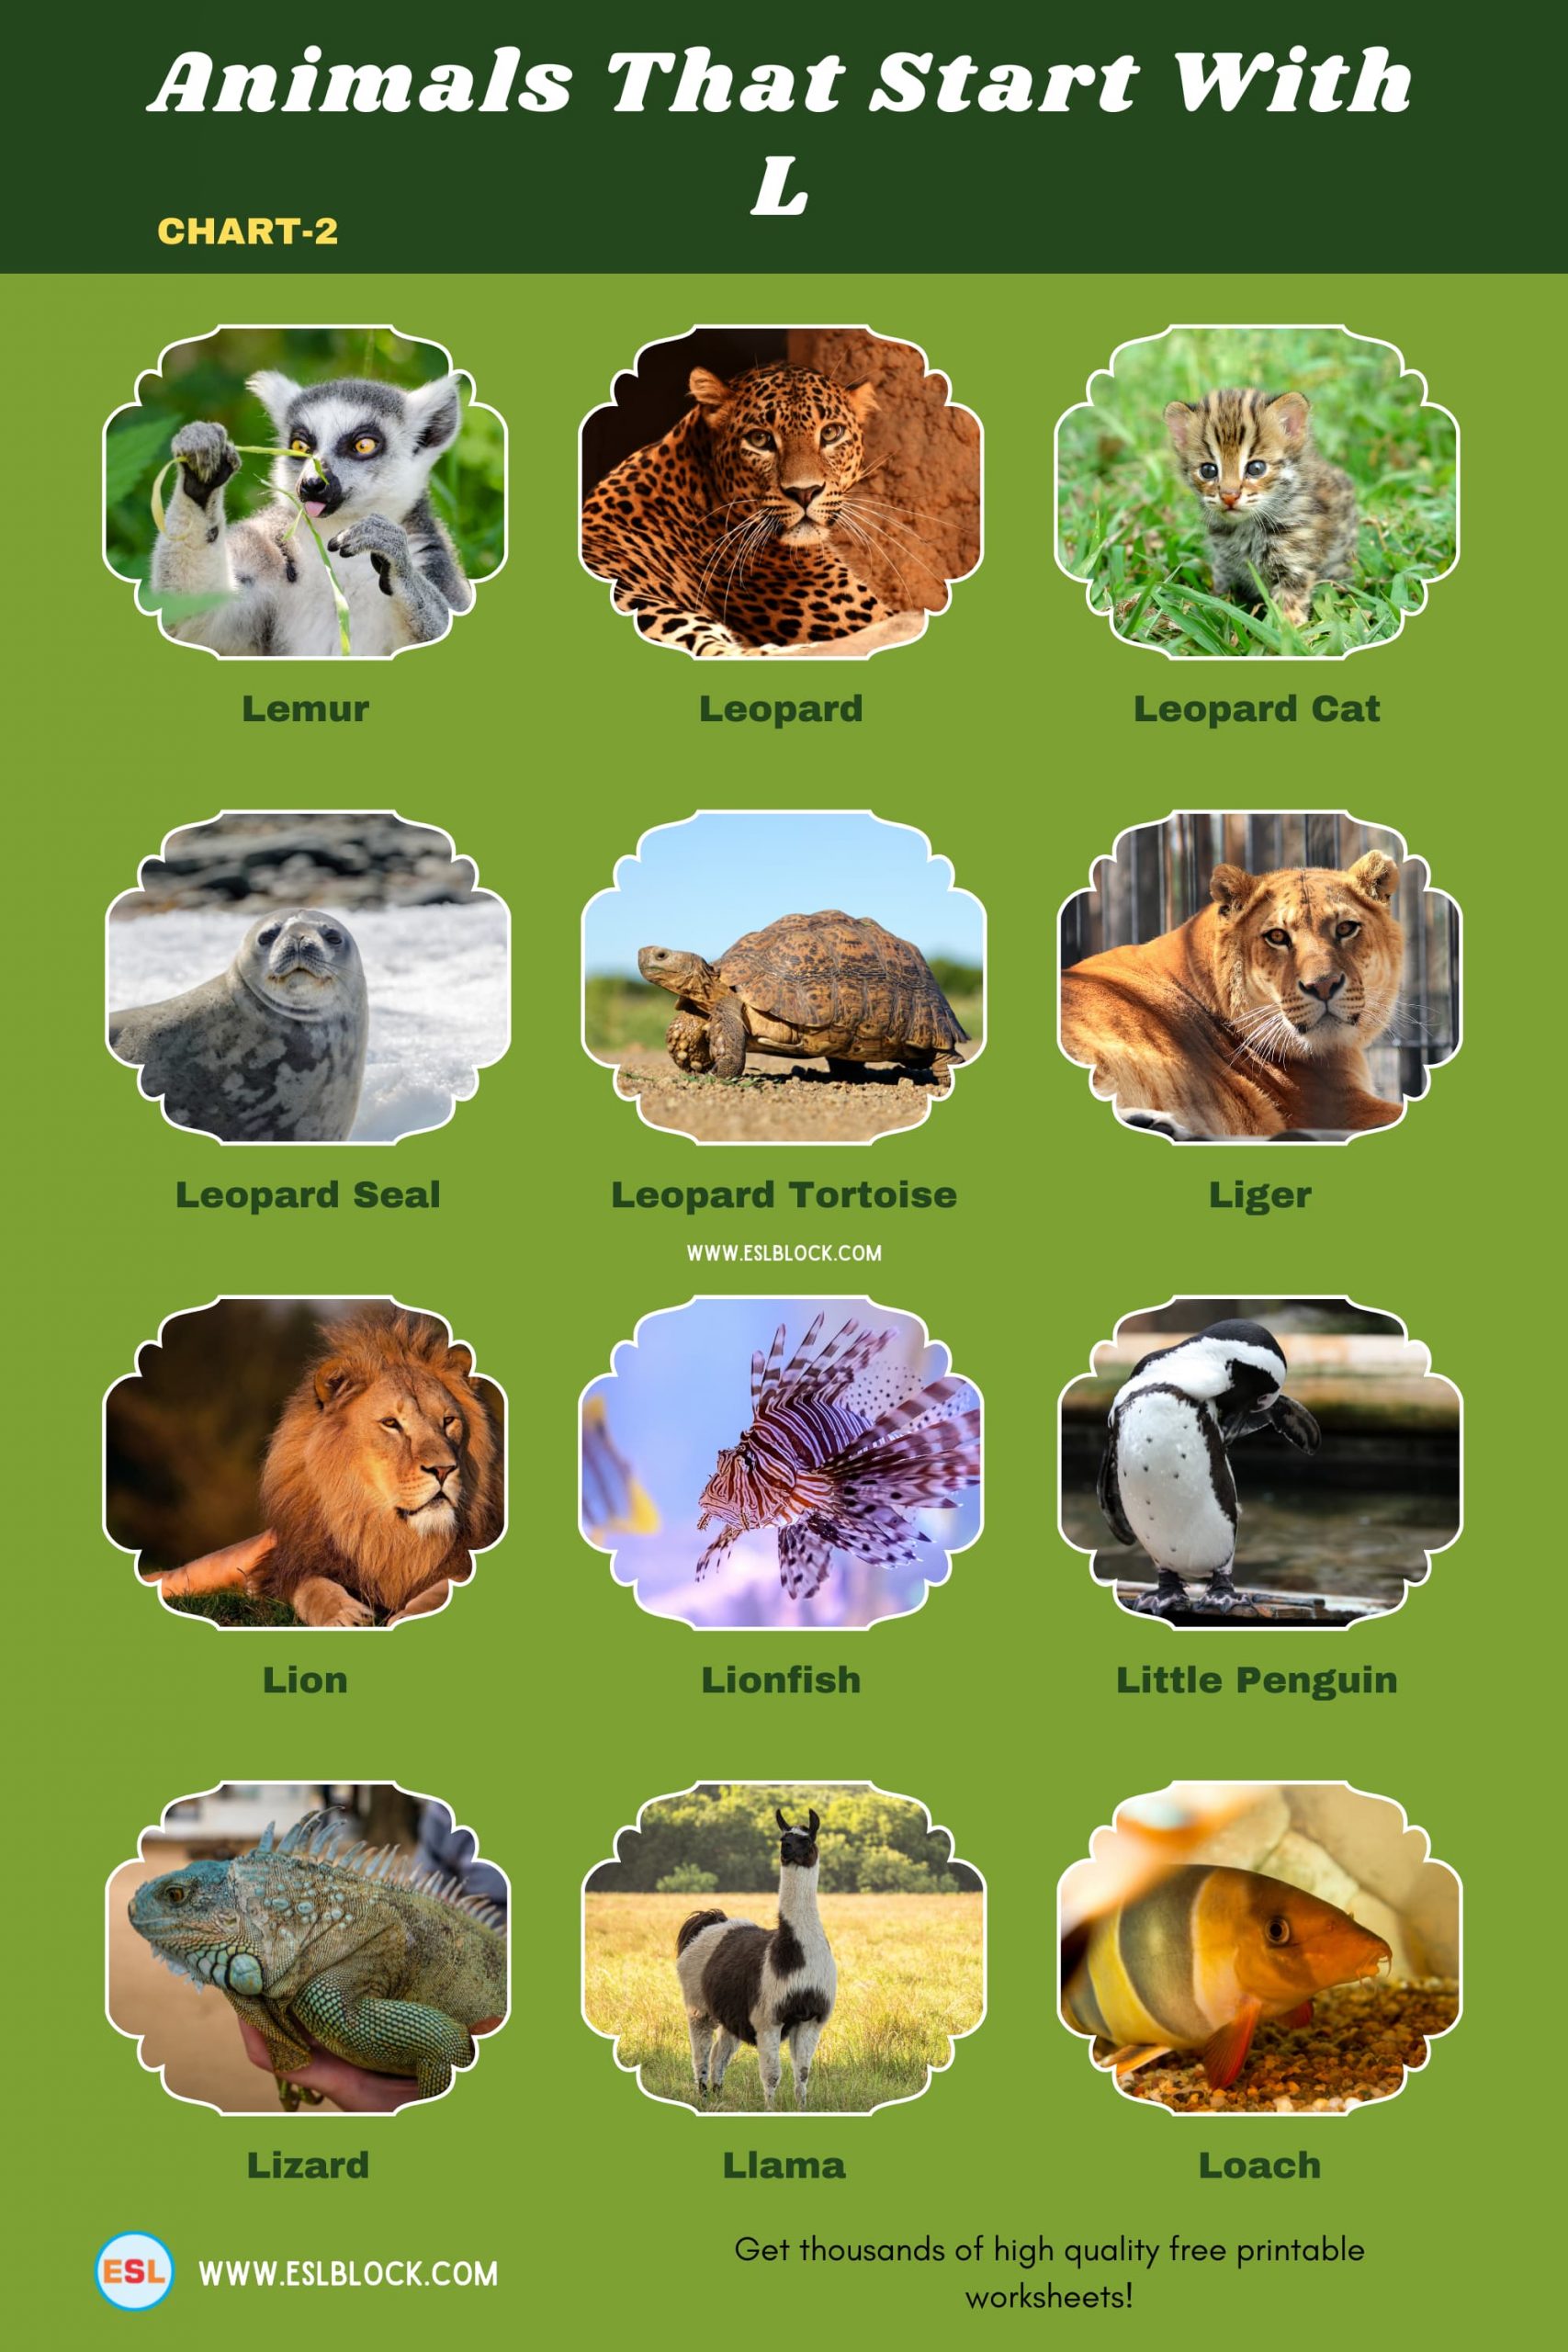 5 Letter Animals Starting With L, Animals List, Animals Names, Animals That Begins WithL L, Animals That Start With L, English, English Nouns, English Vocabulary, English Words, L Animals, L Animals in English, L Animals Names, List of Animals That Start With L, Nouns, Vocabulary